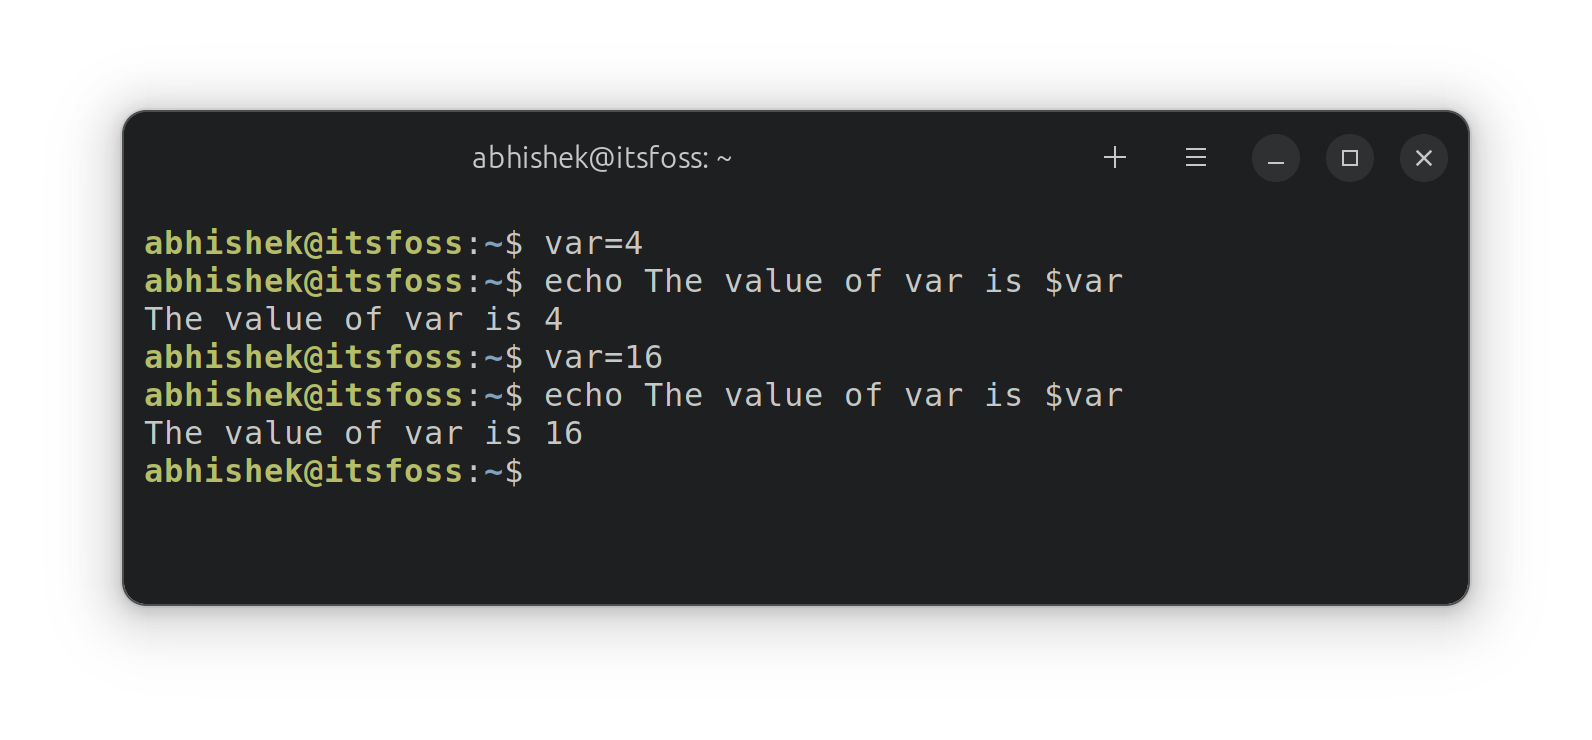 Using variables in shell